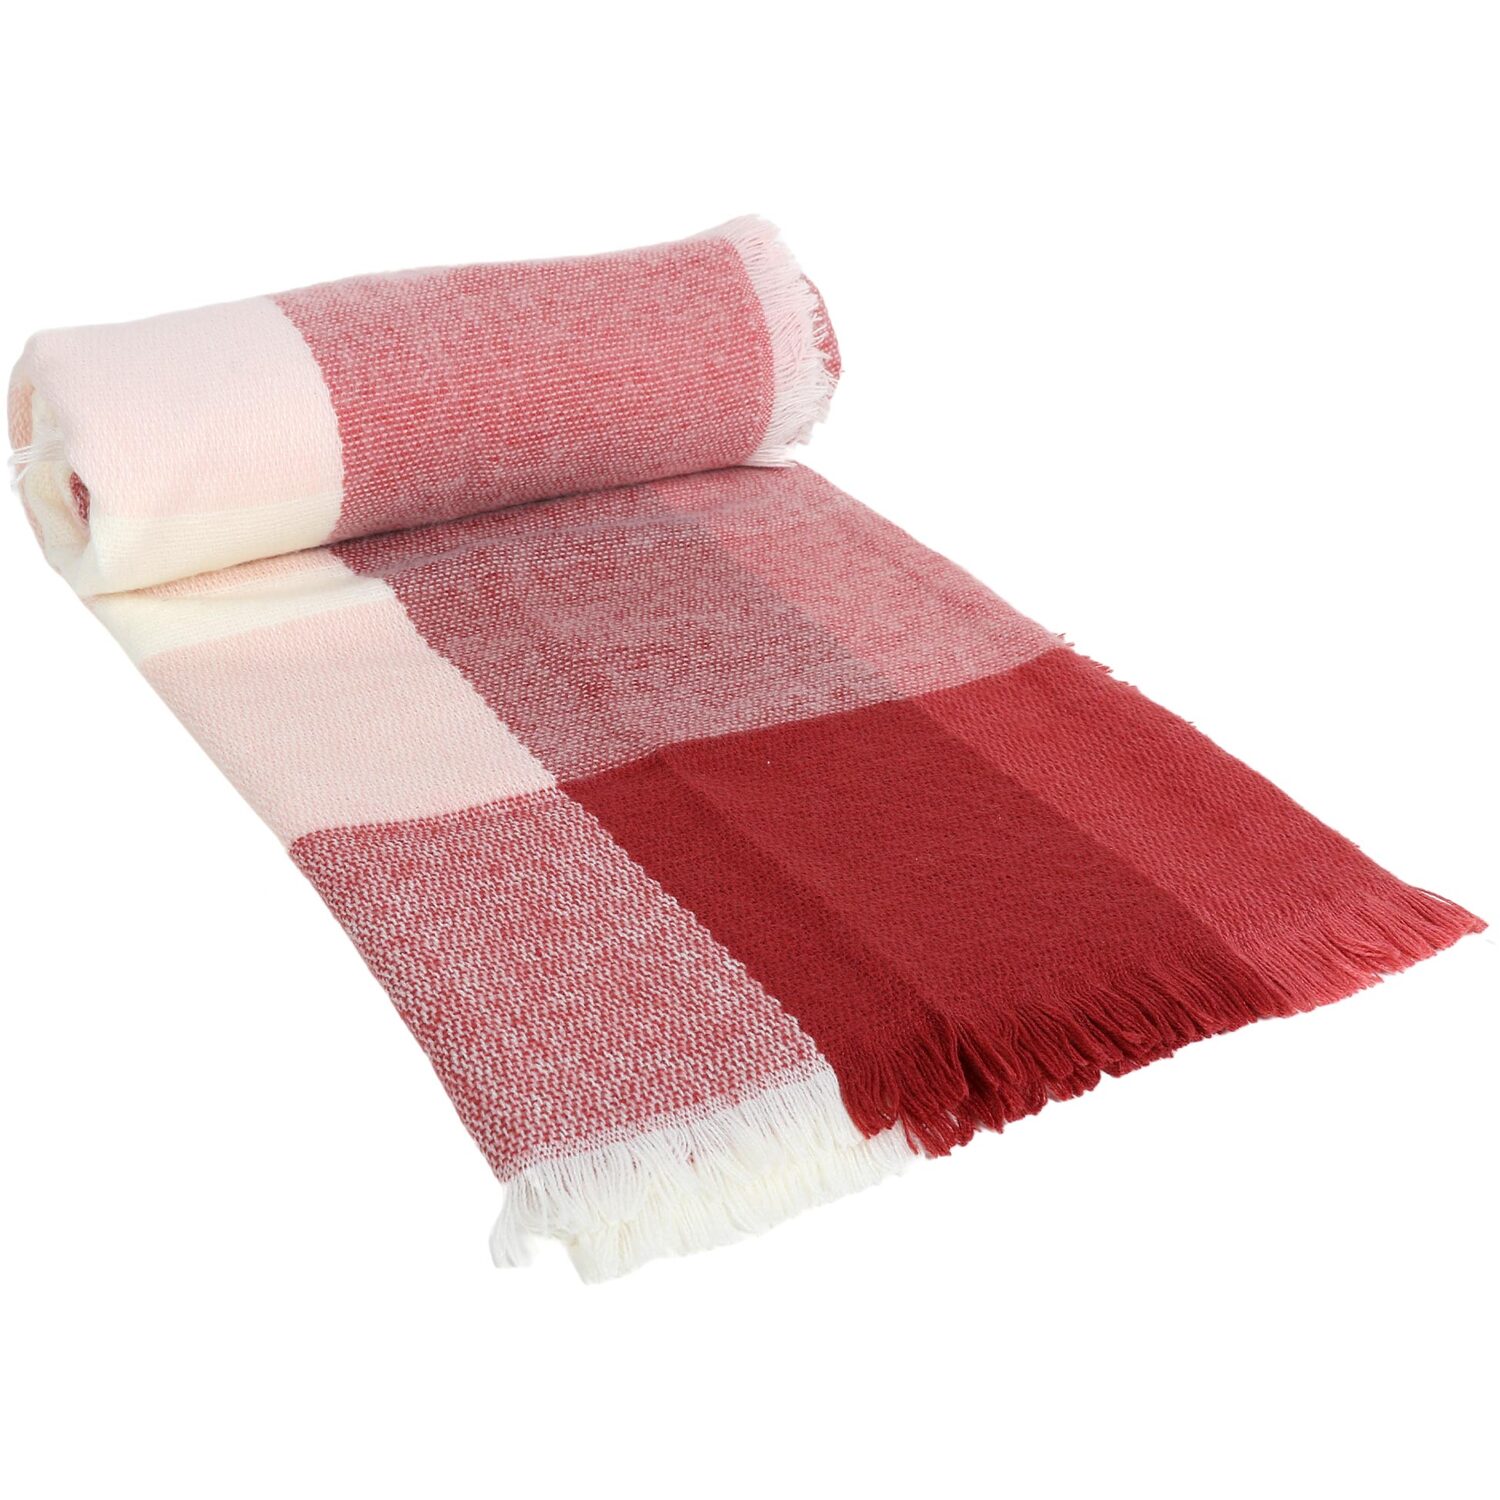 Melrose Check Throw - Mulberry Image 4